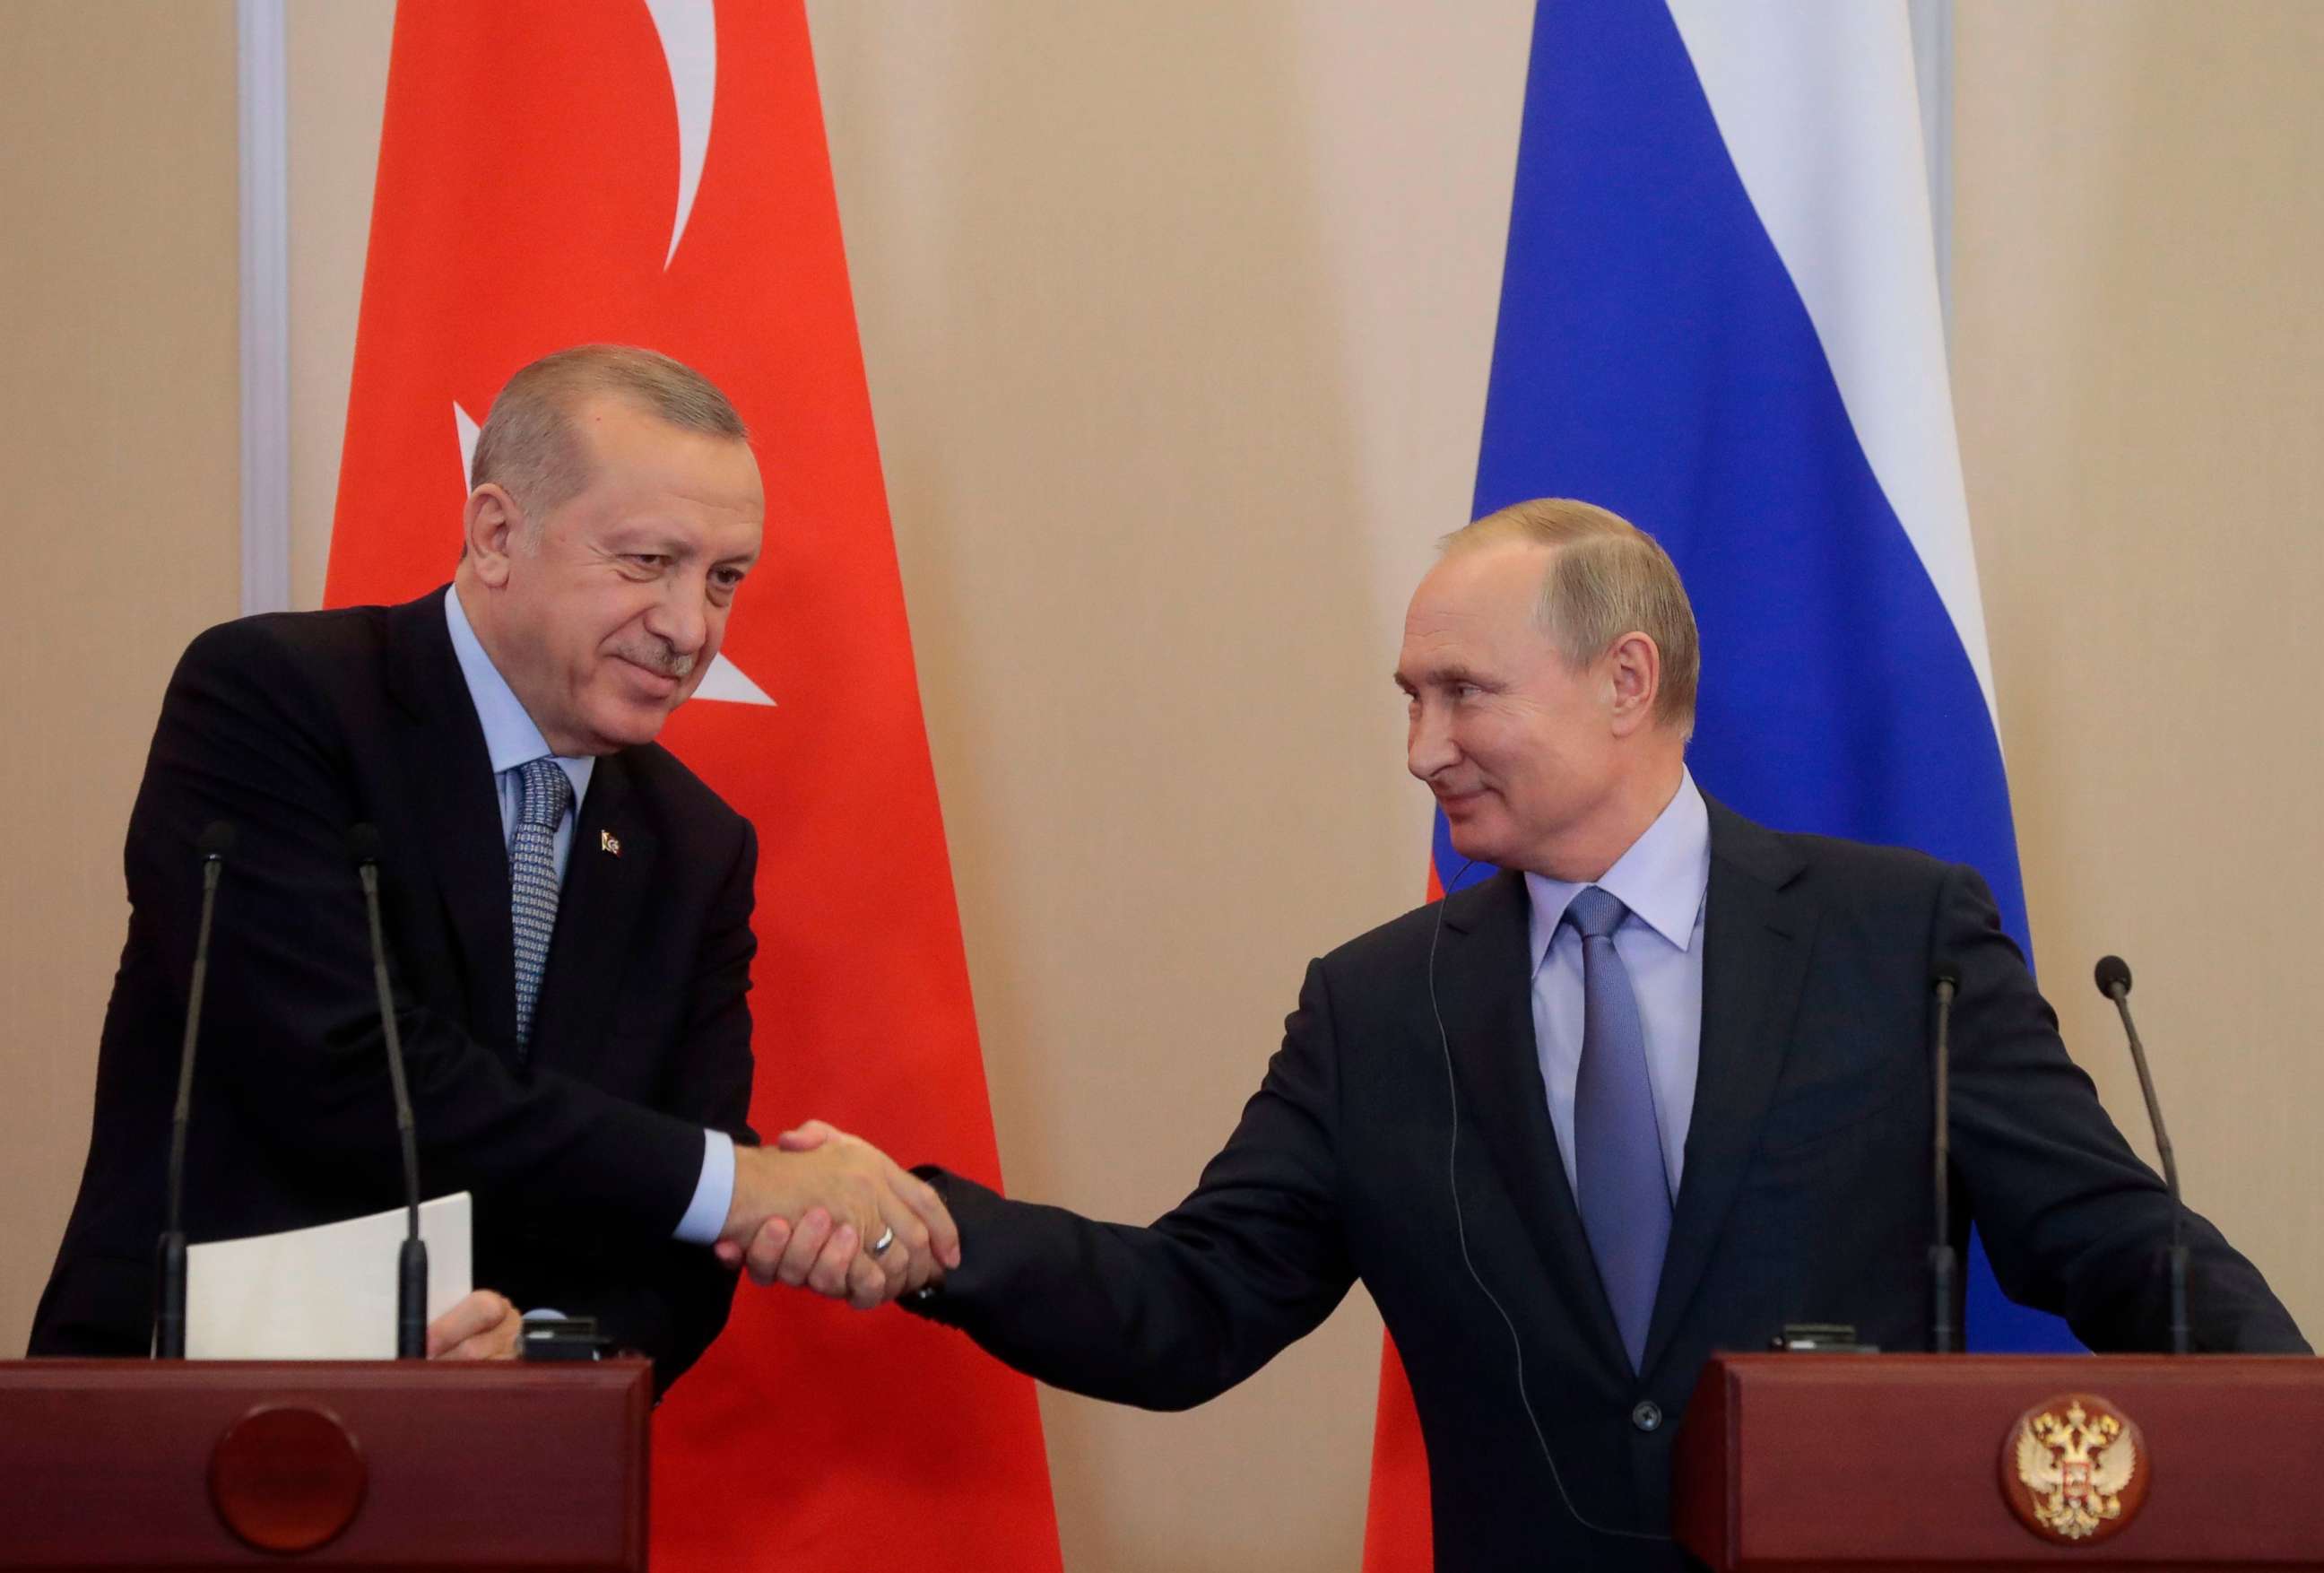 PHOTO: Russian President Vladimir Putin shakes hands with his Turkish counterpart Recep Tayyip Erdogan during a joint press conference following their talks in the Black sea resort of Sochi on Oct. 22, 2019.